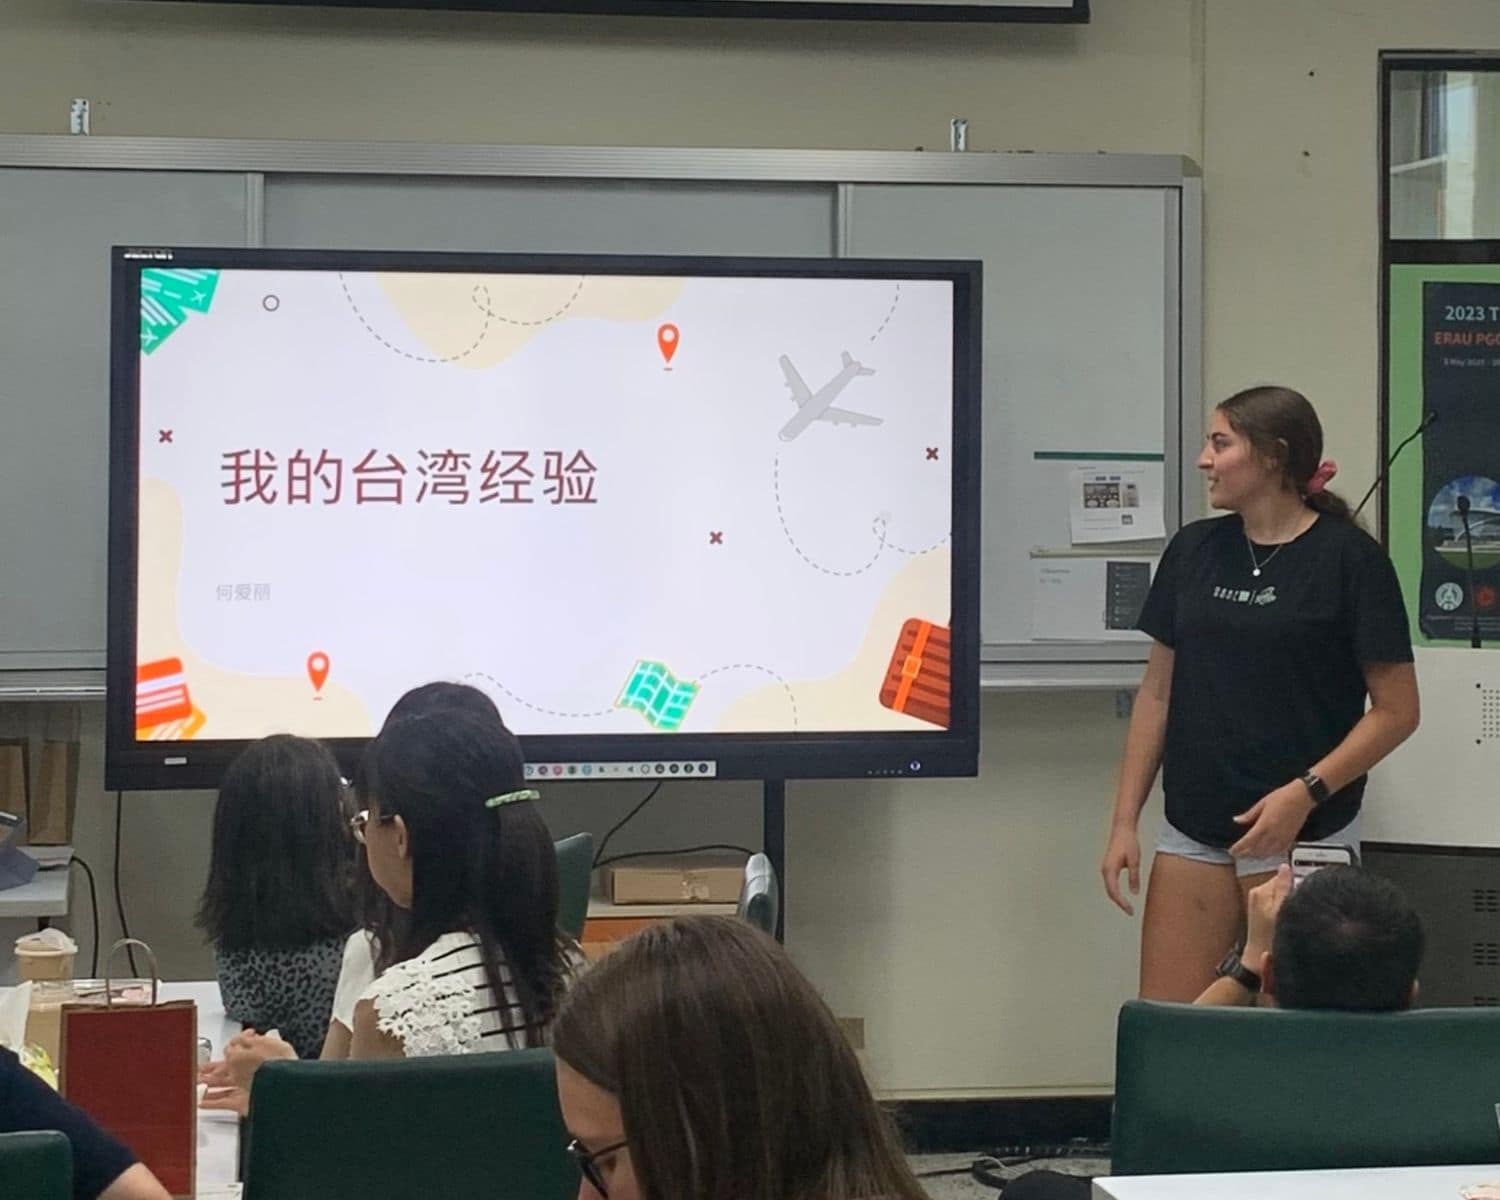 This is me giving my closing presentation at the sendoff party during the end of our program. I talked about what I learned and everything I enjoyed in Taiwan. (Photo: Alix Craft)